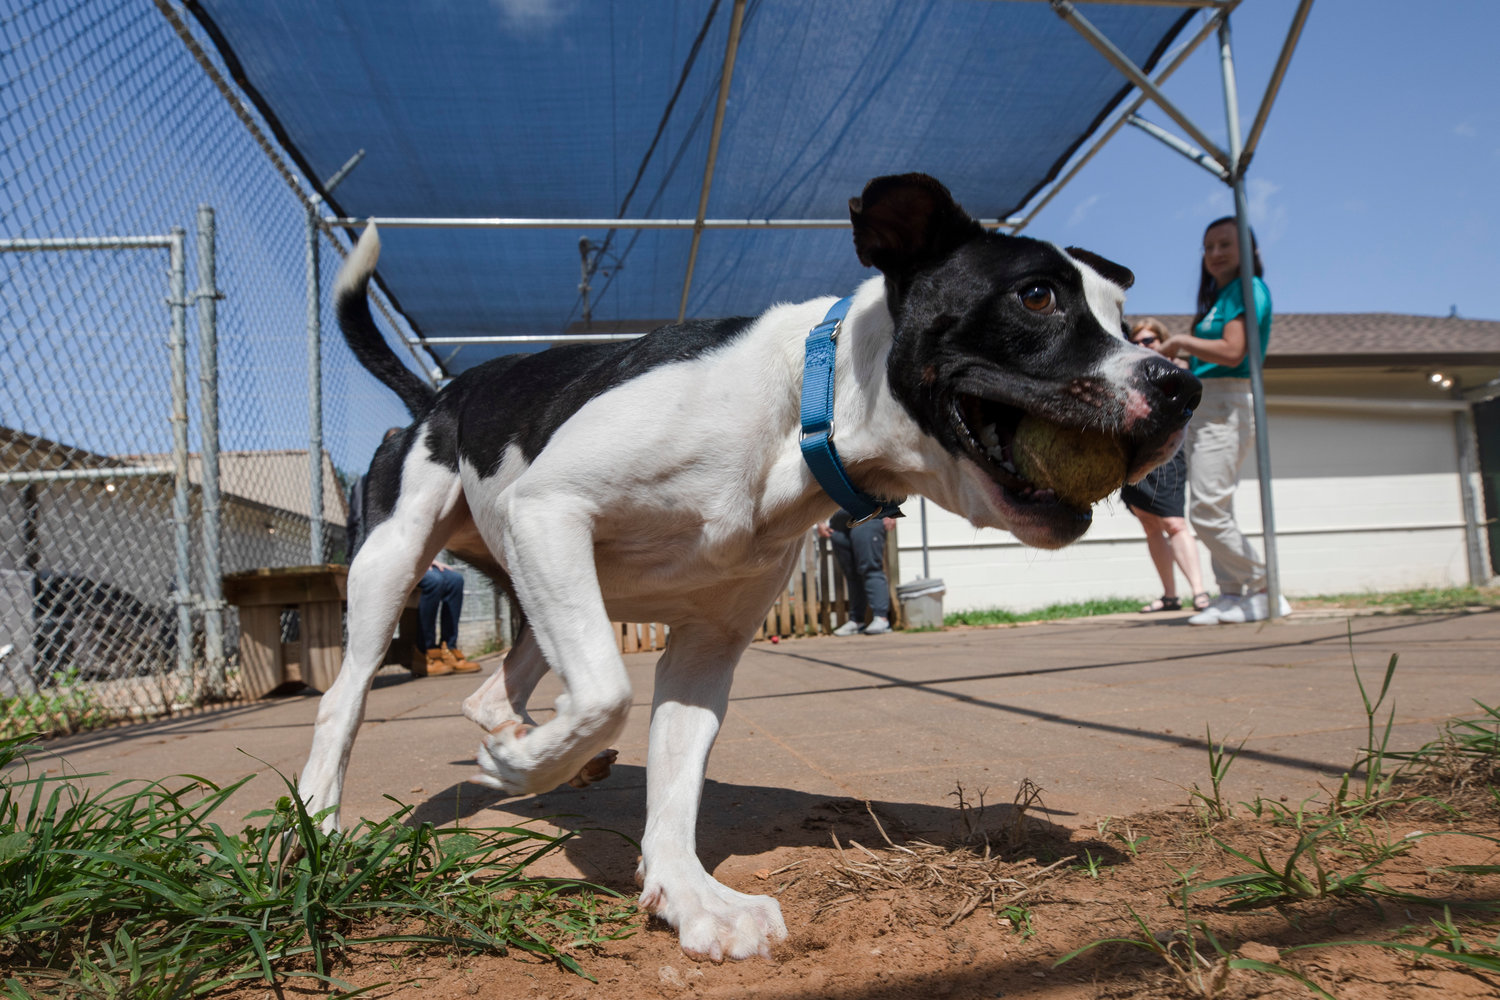 Lazlo is the Baldwin Humane Society longest resident and it is time for him to find a forever home. When this photo was taken in 2022, Lazlo had been at the shelter for two years. He loves to play ball and is a sweetheart.